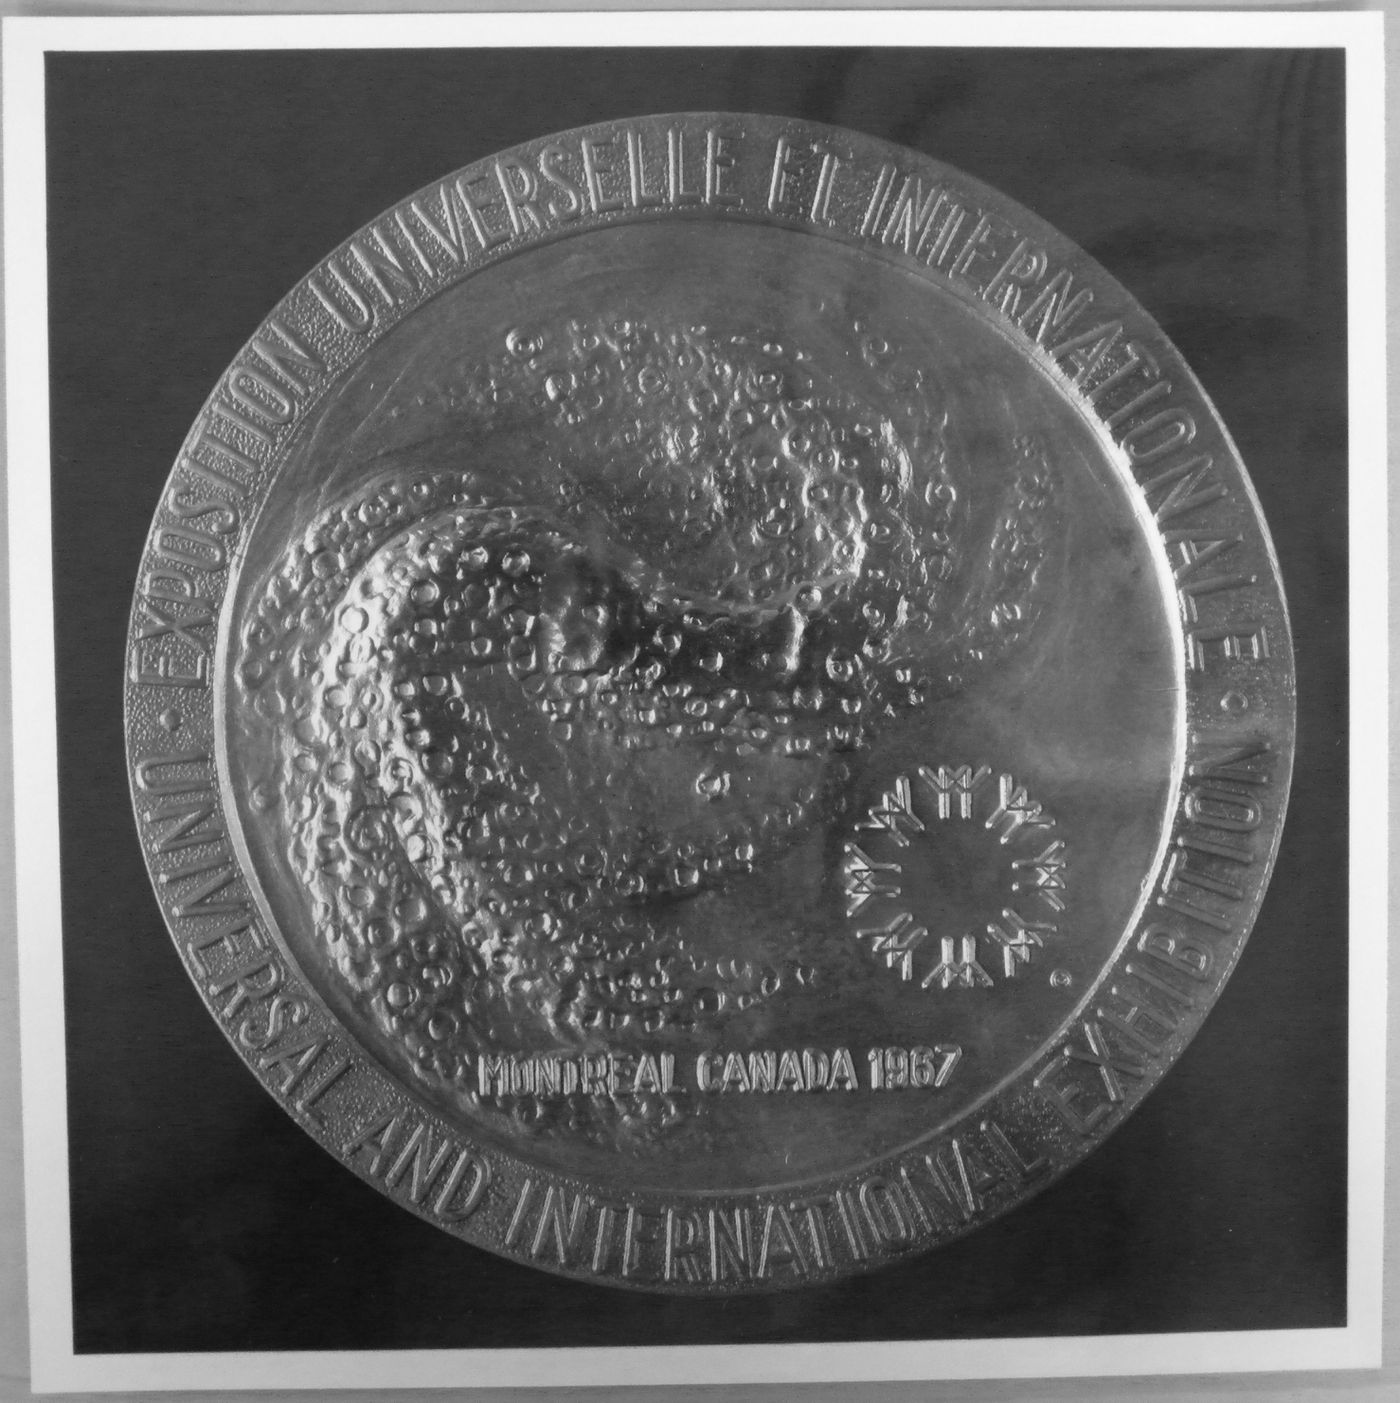 View of a medal of Expo 67 presented to the CN Pavilion by officials, Expo 67, Montréal, Québec